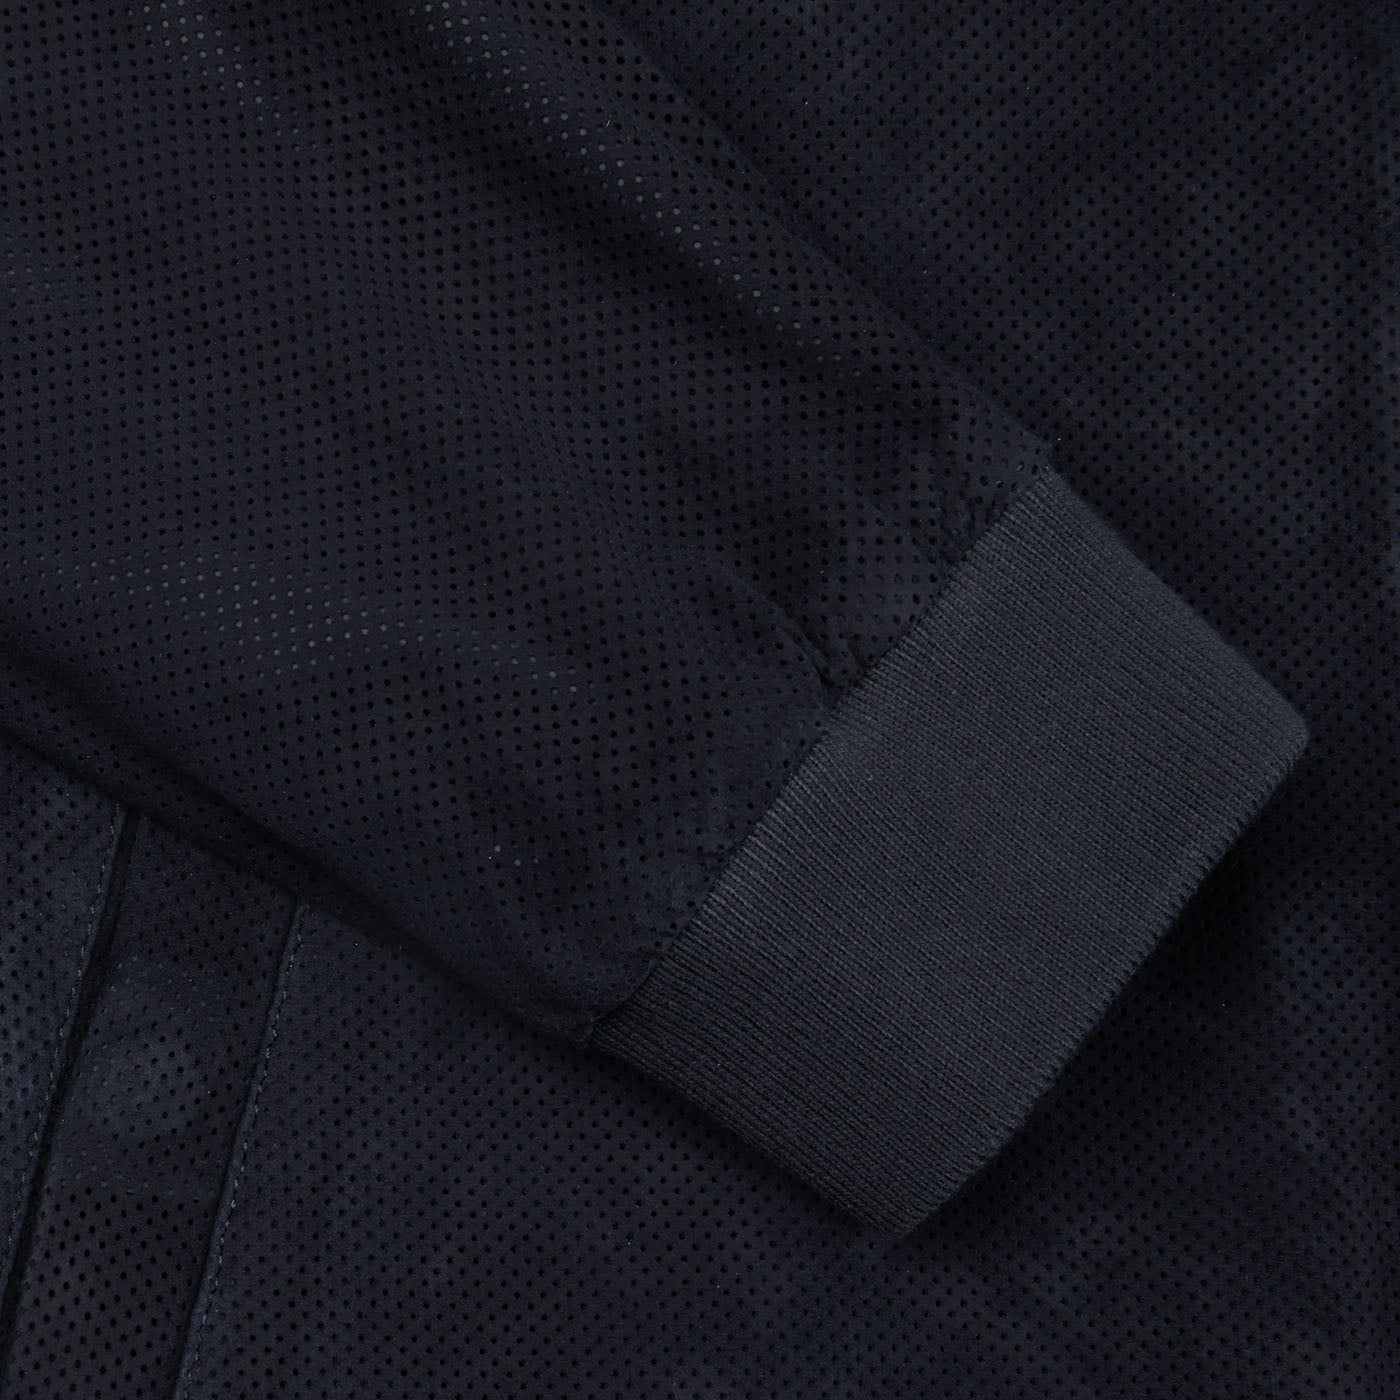 A close up of a Manto navy blue perforated suede leather blouson.